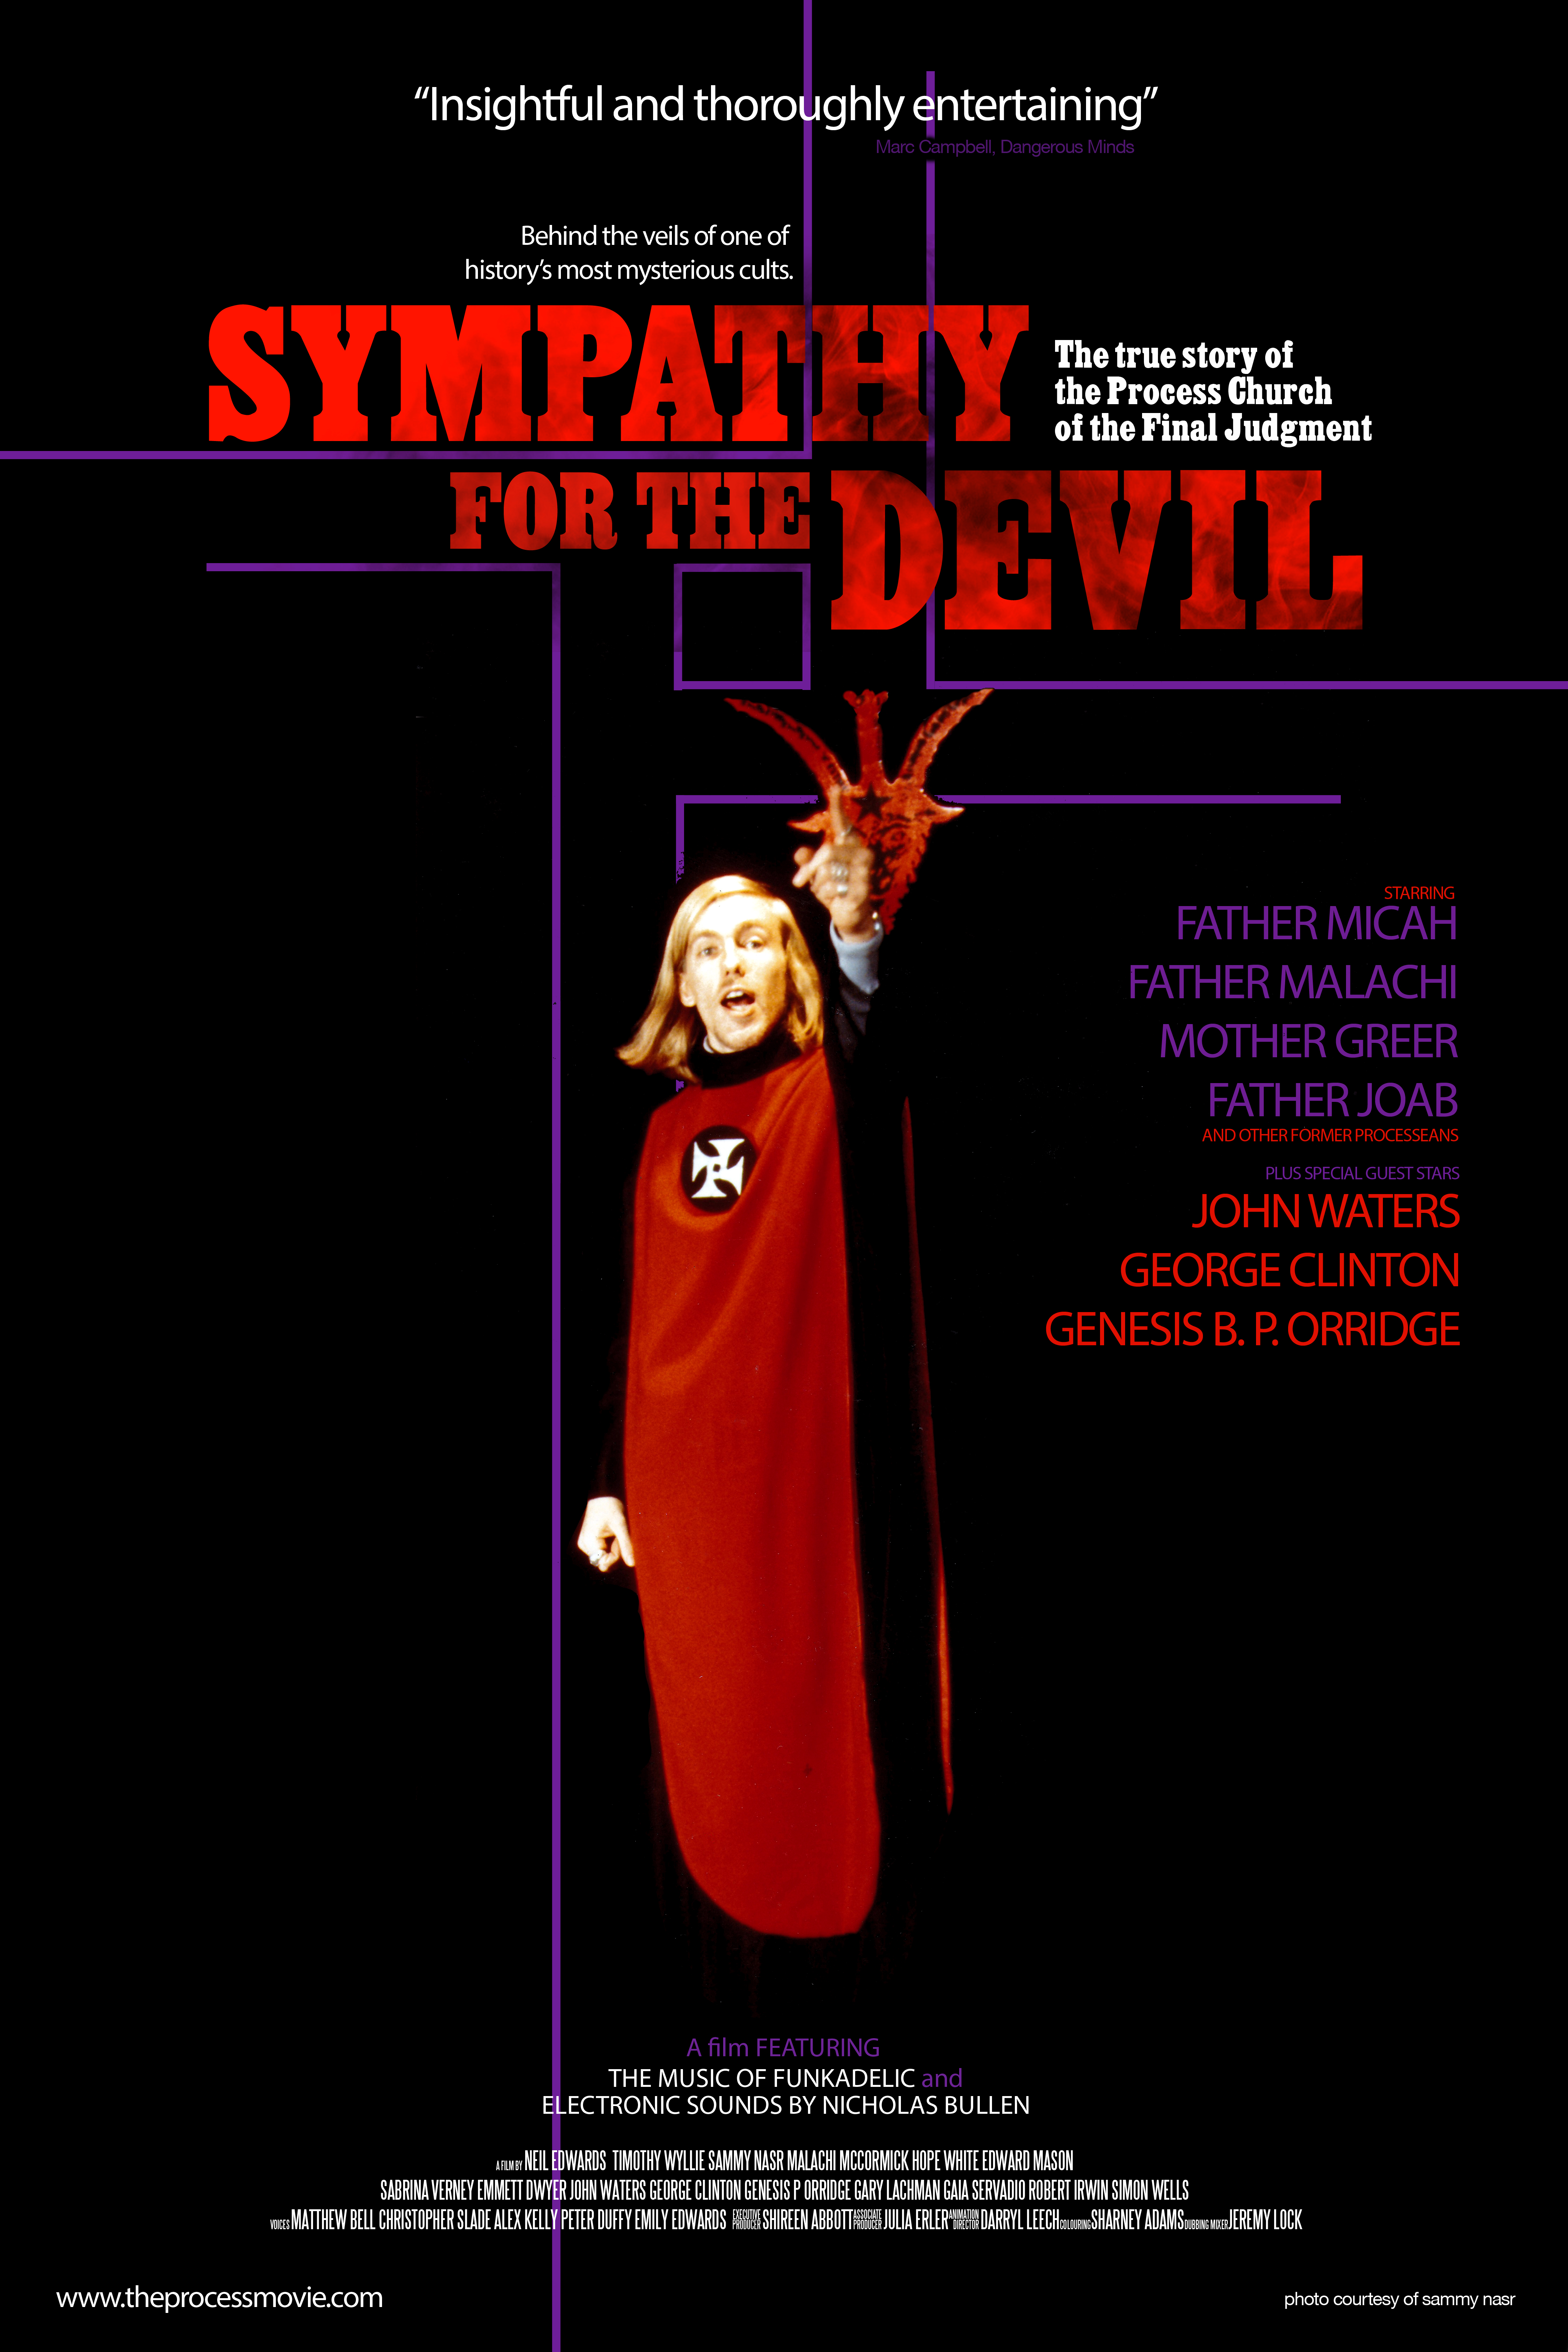 Sympathy For The Devil: The True Story of The Process Church of the Final Judgment (2015) starring George Clinton on DVD on DVD